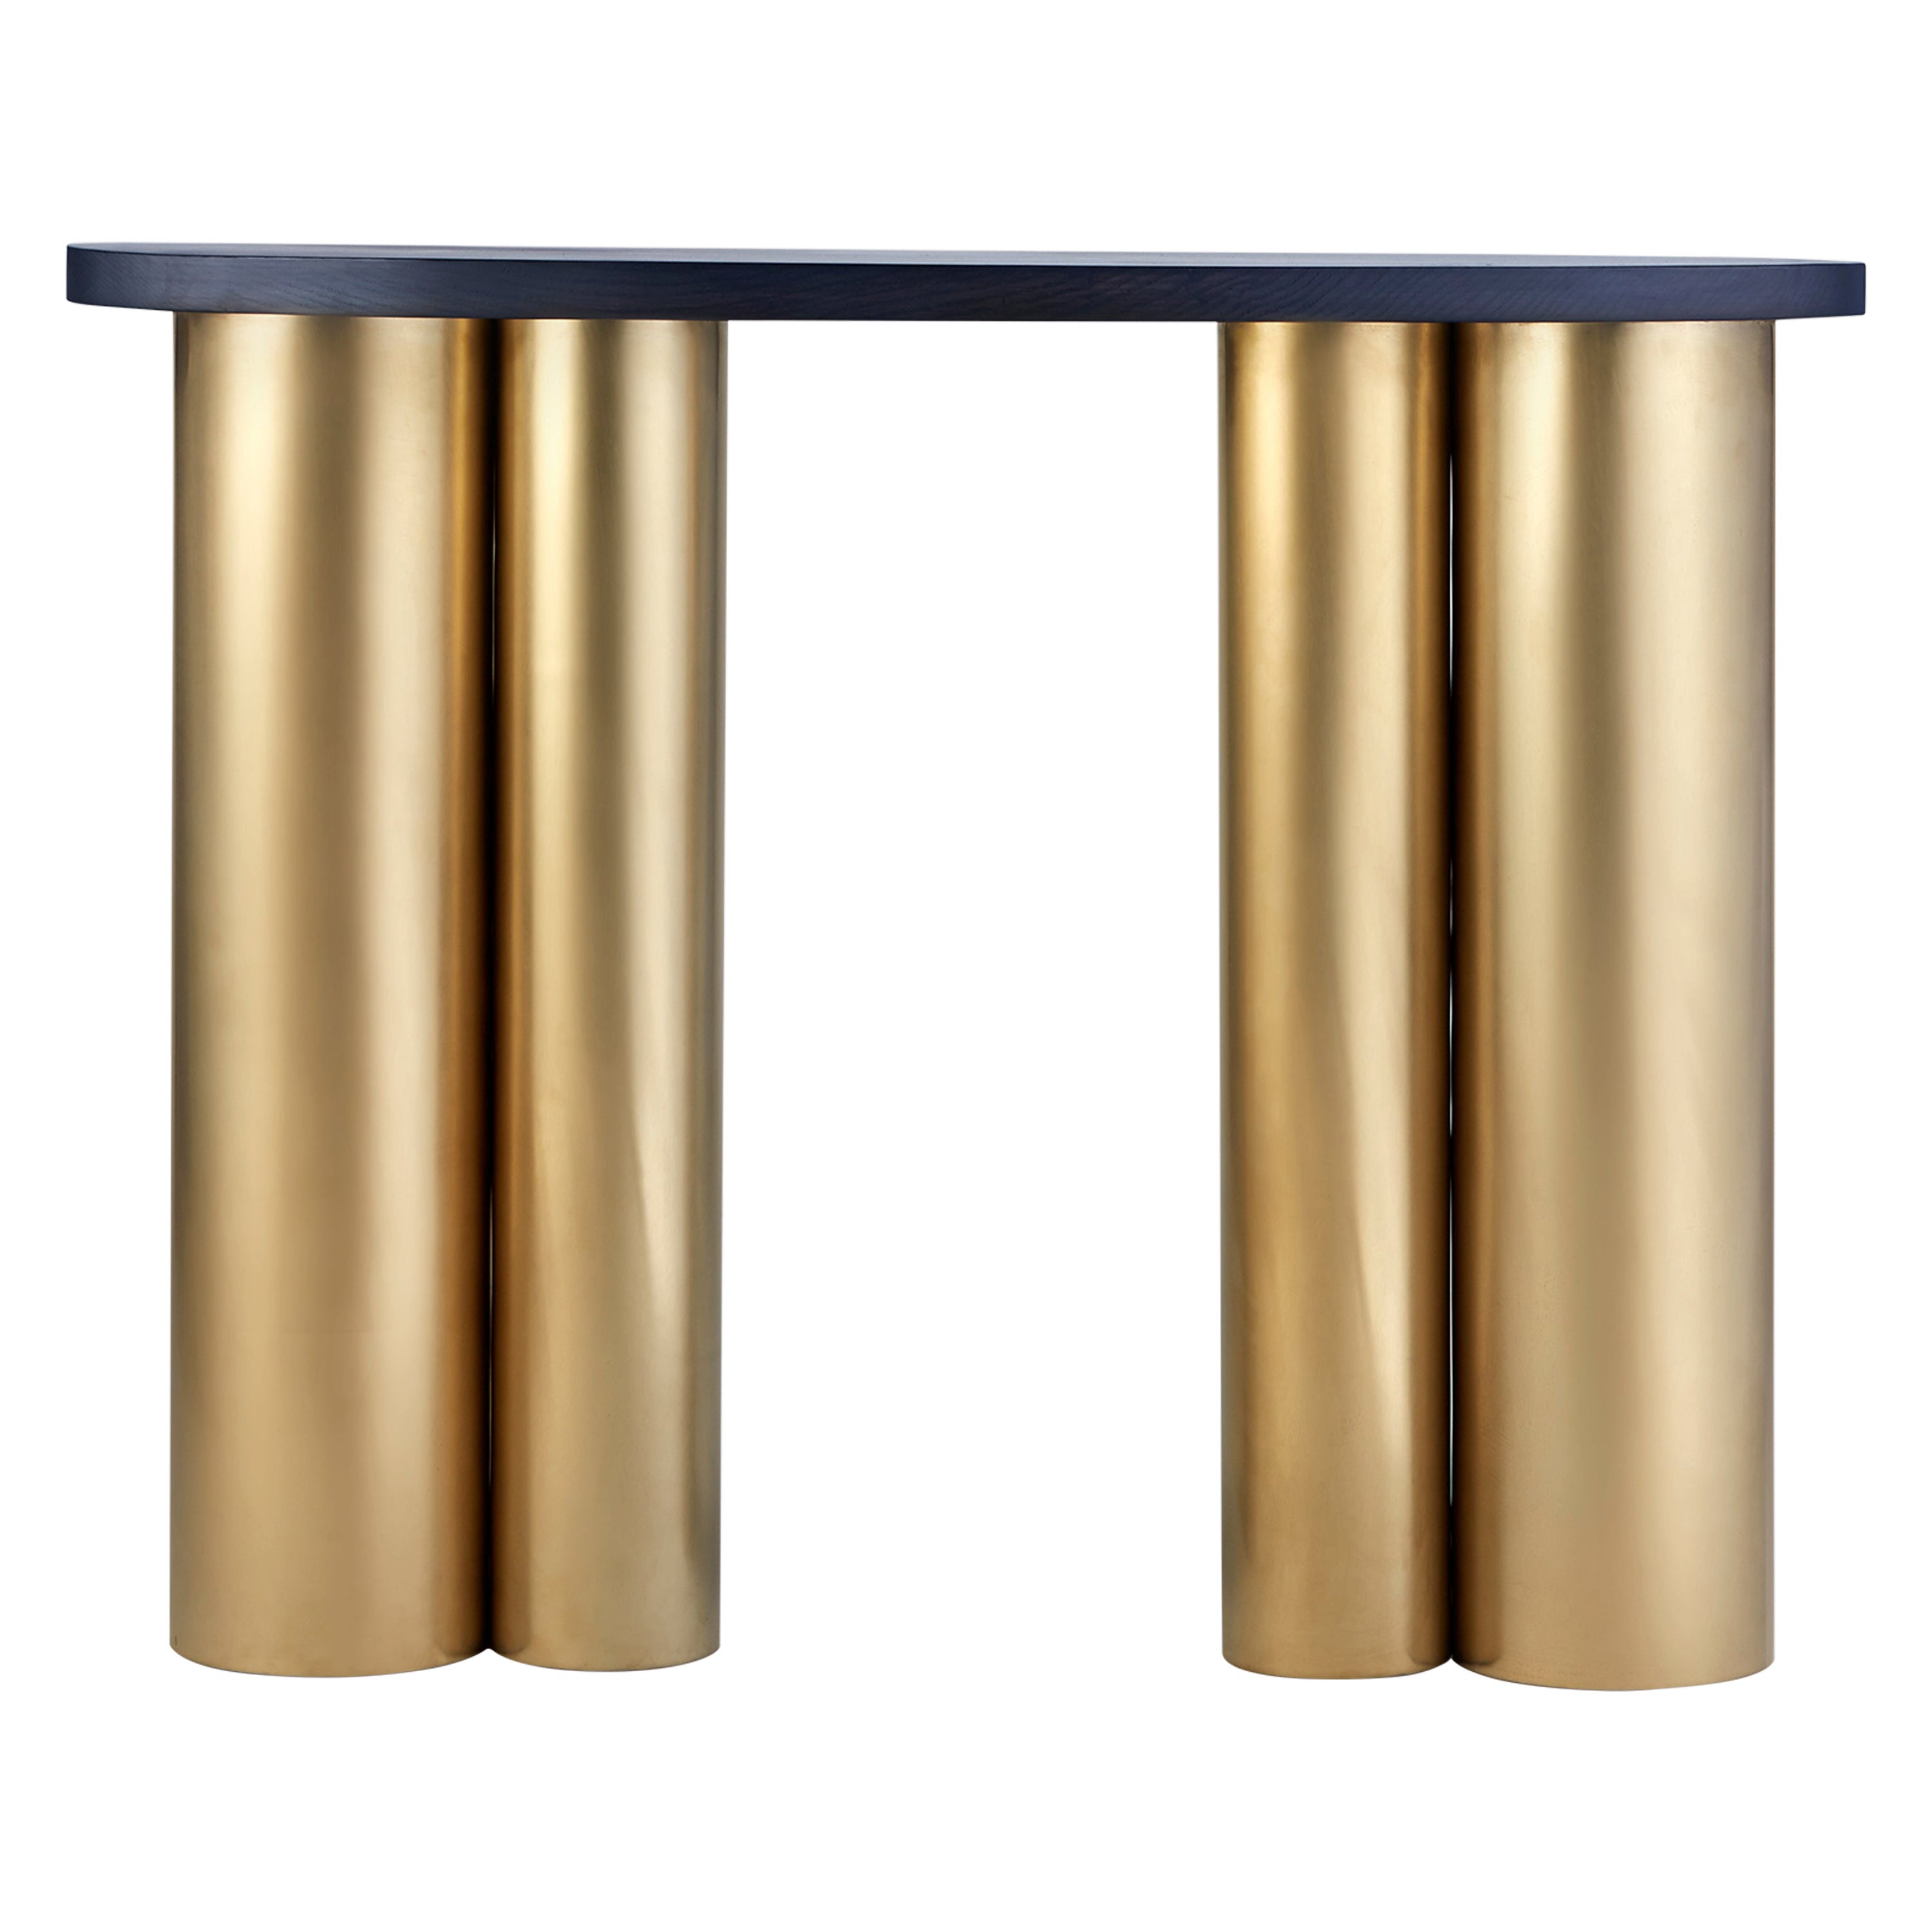 Unique Bloom Table Gold by Hatsu For Sale